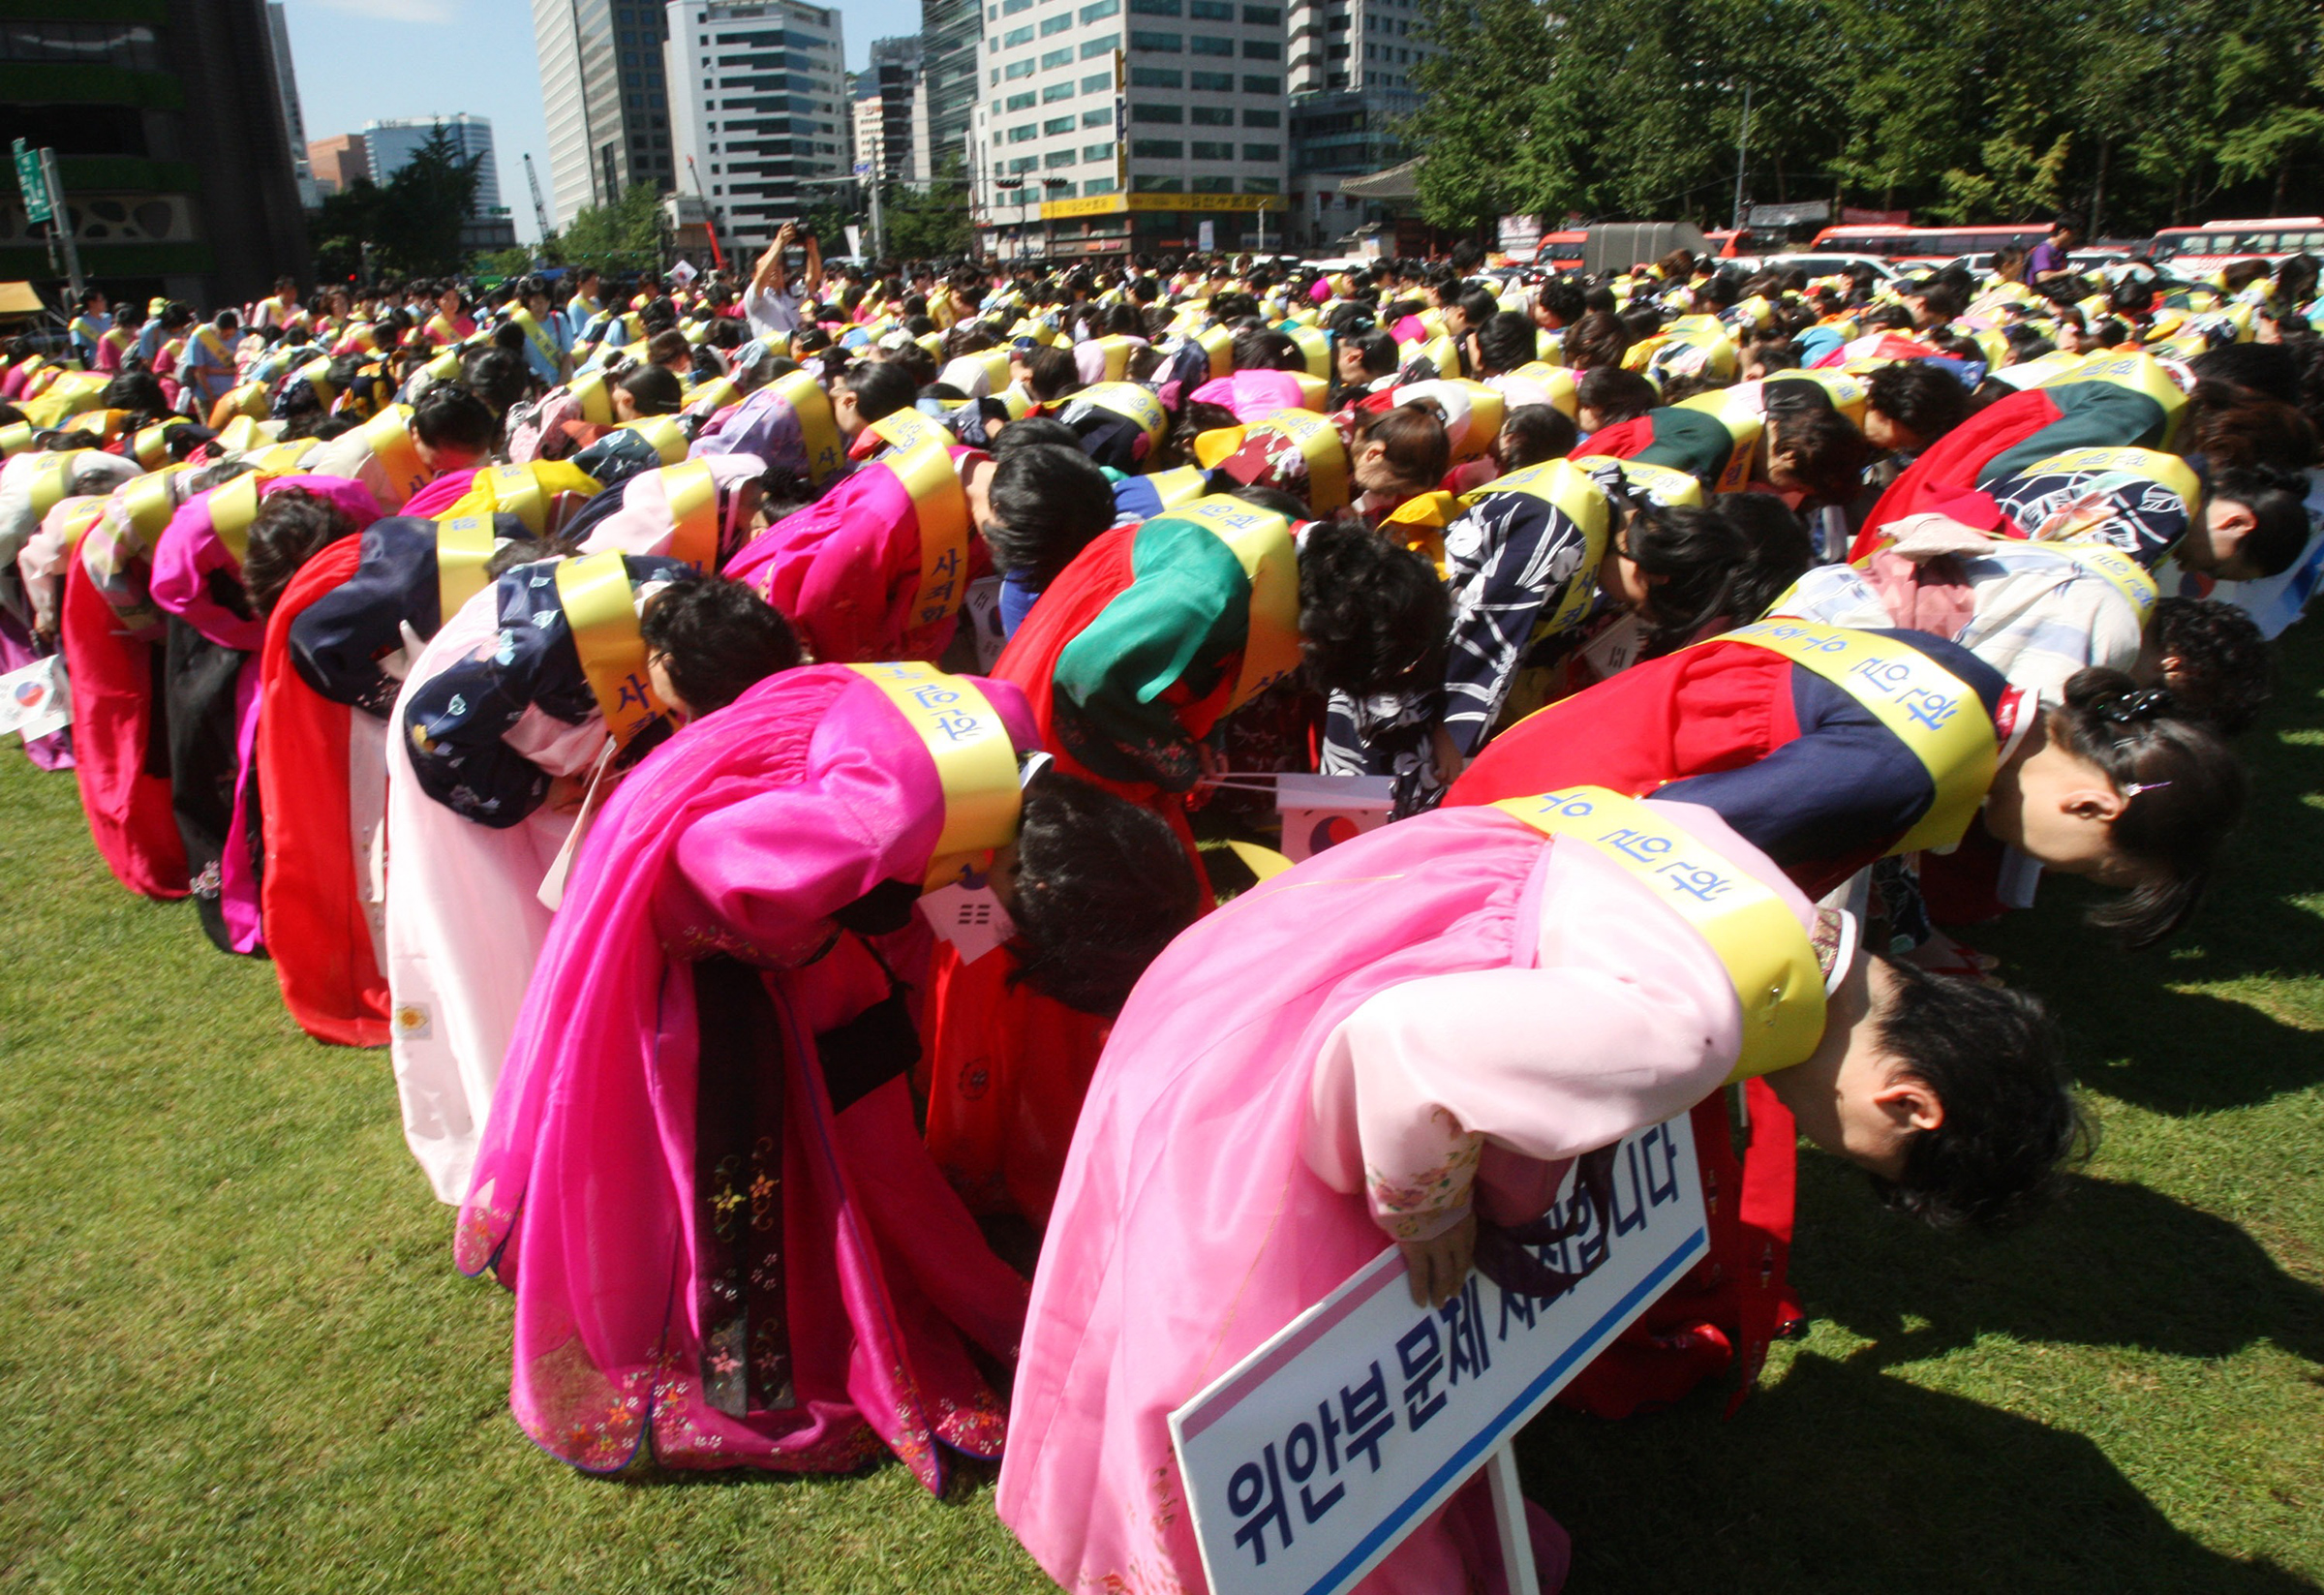 Japanese members of Unification Church bow as an act of apology for the war time Korean sex slaves conducted by Japanese military during a rally ahead of an anniversary celebration of Korea’s liberation from Japan’s colonial rule, in Seoul, Aug. 14, 2012.